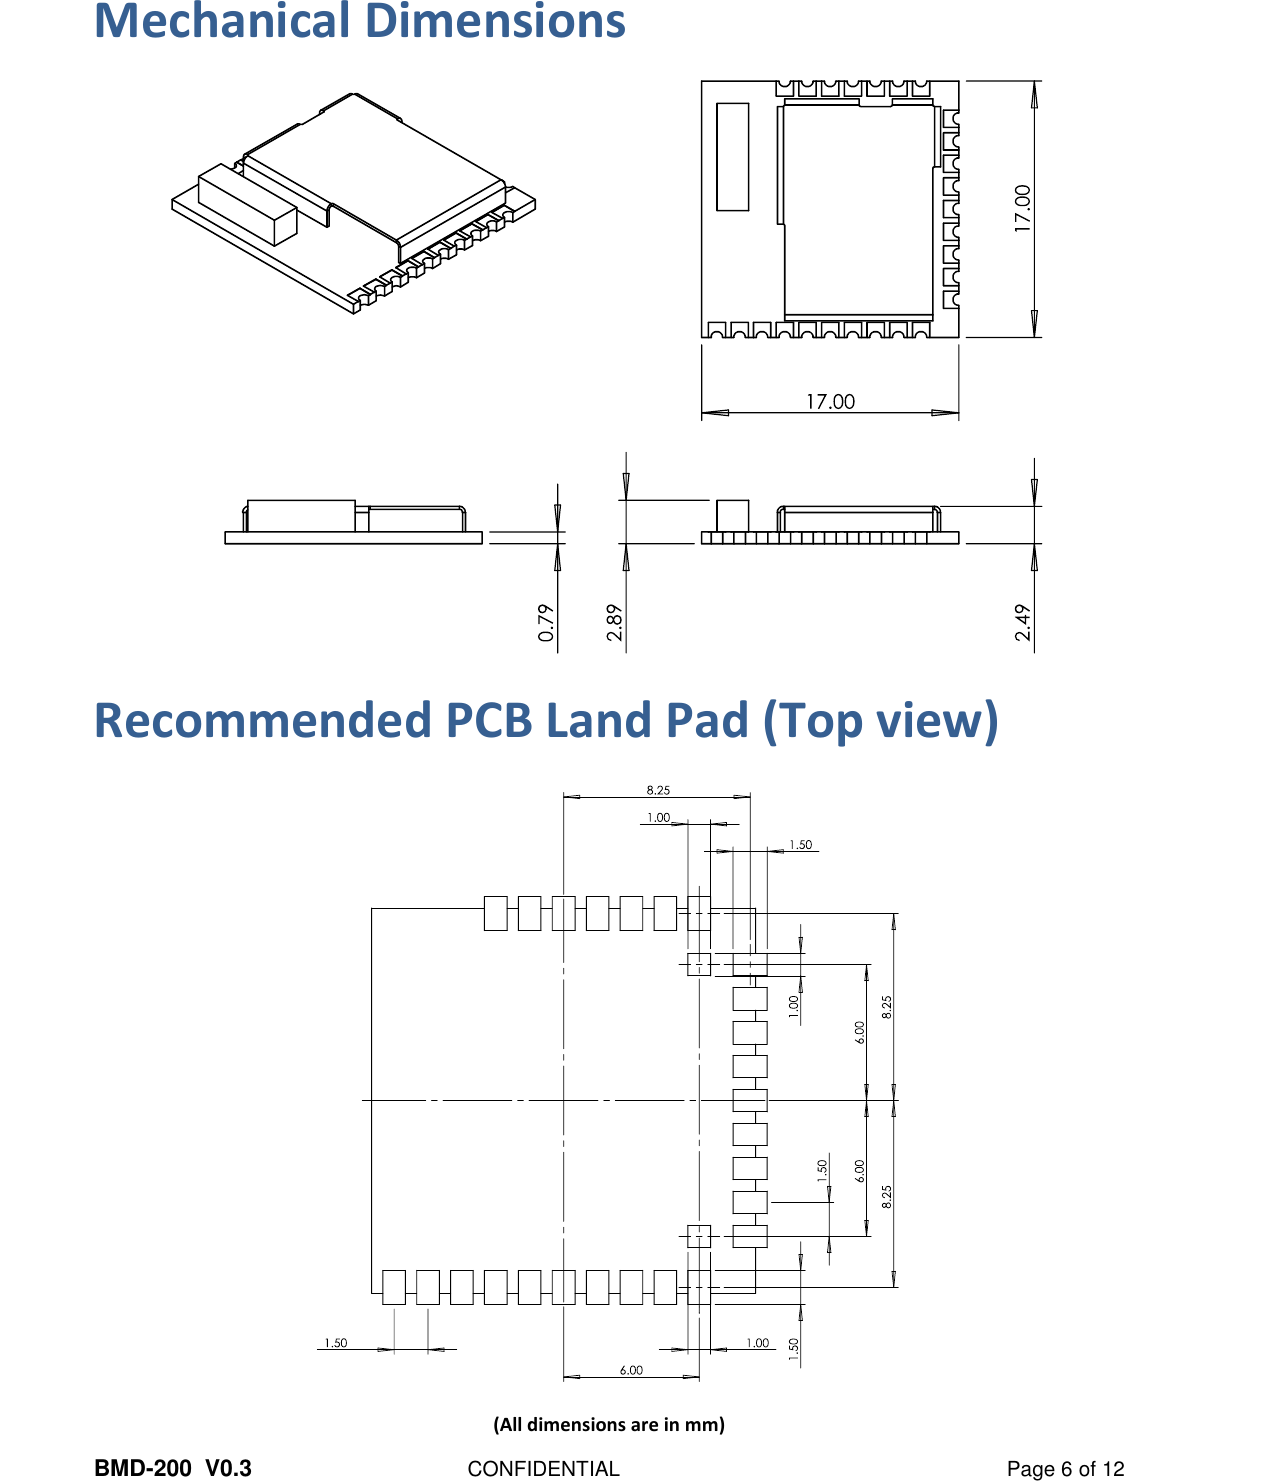  BMD-200  V0.3  CONFIDENTIAL  Page 6 of 12 Mechanical Dimensions     Recommended PCB Land Pad (Top view)   (All dimensions are in mm) 